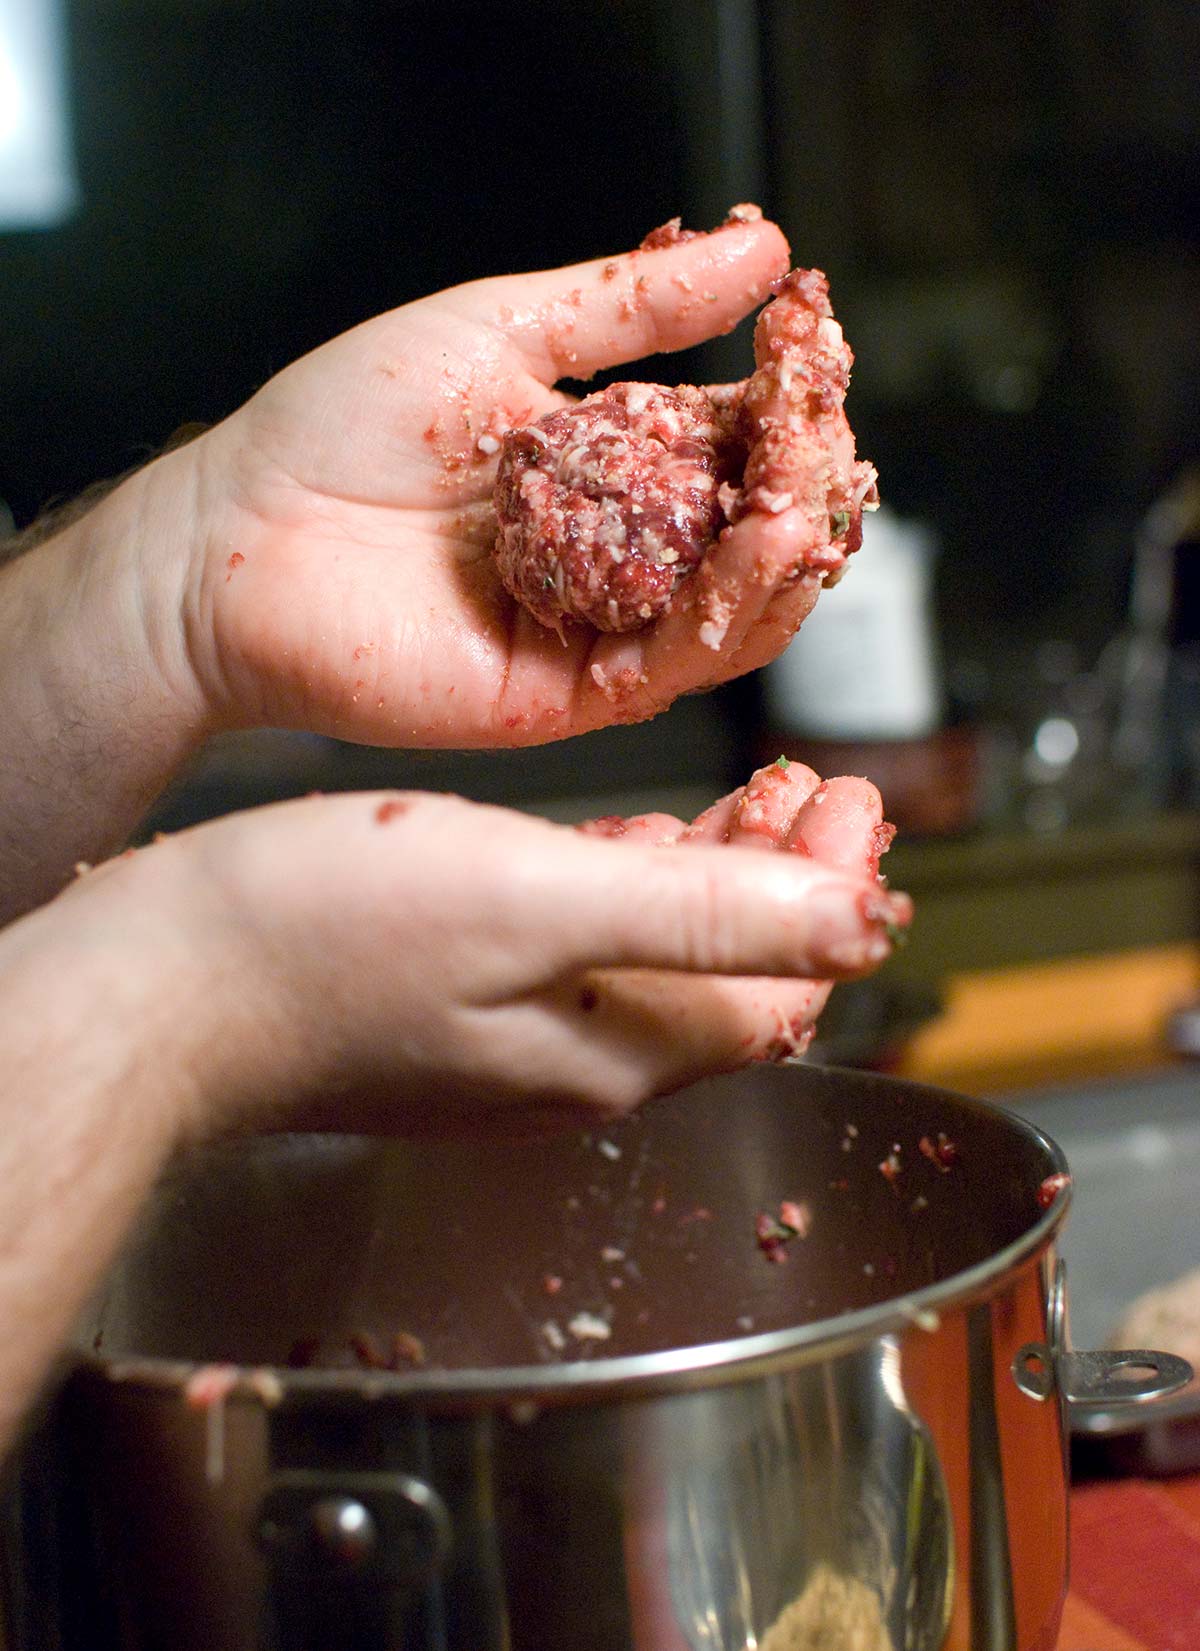 Forming venison meatballs by hand